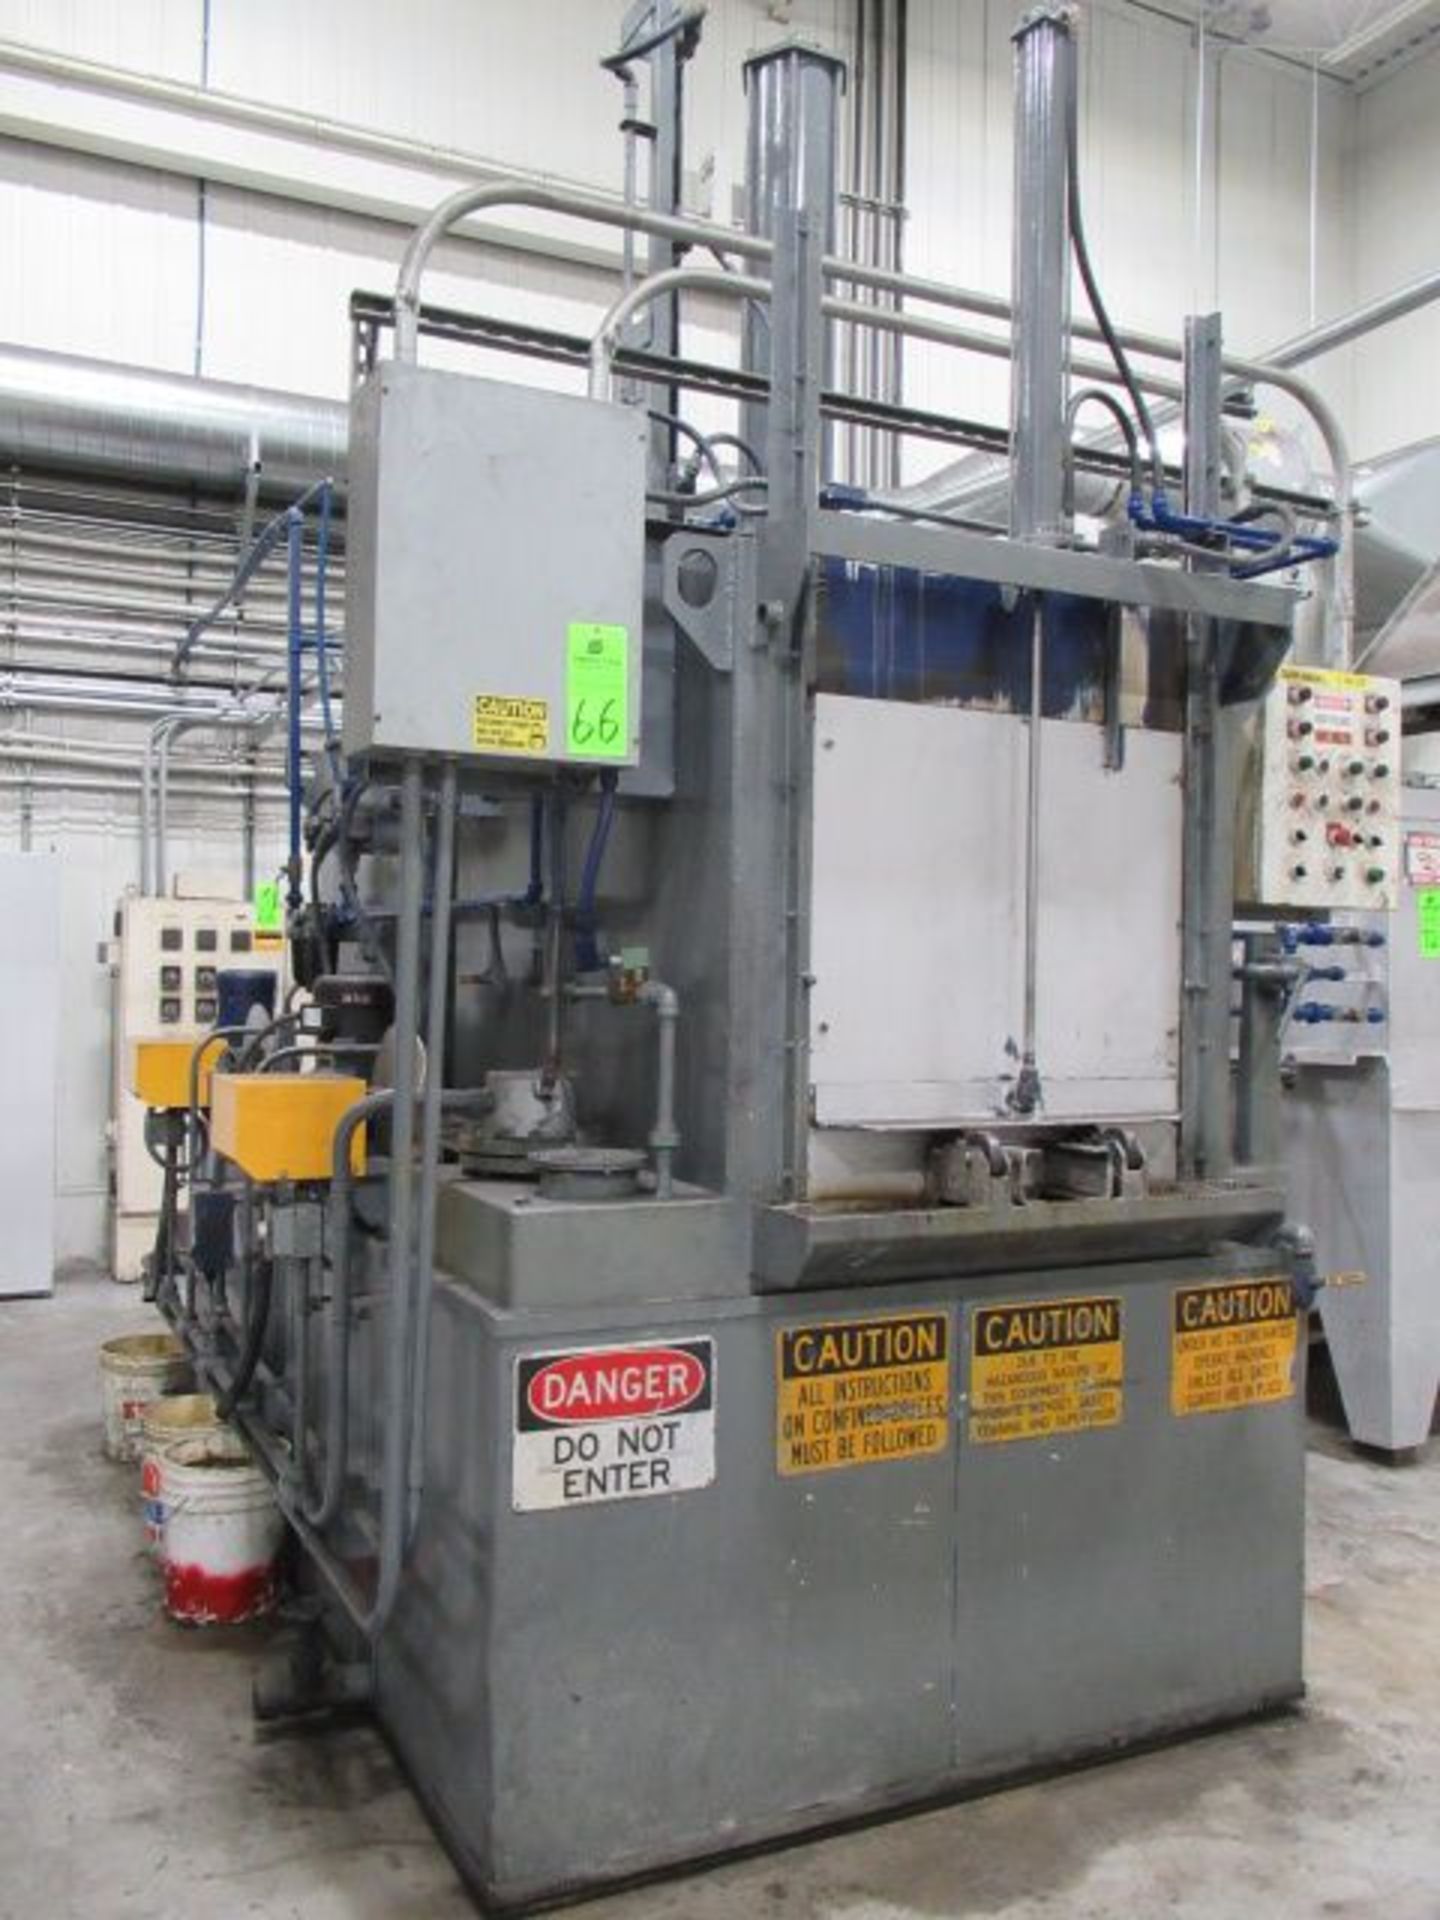 1999 SURFACE COMBUSTION WILLIAMS Pre/Post Carburizing 2 Stage Wash System, s/n 02498, w/ 24”x36”